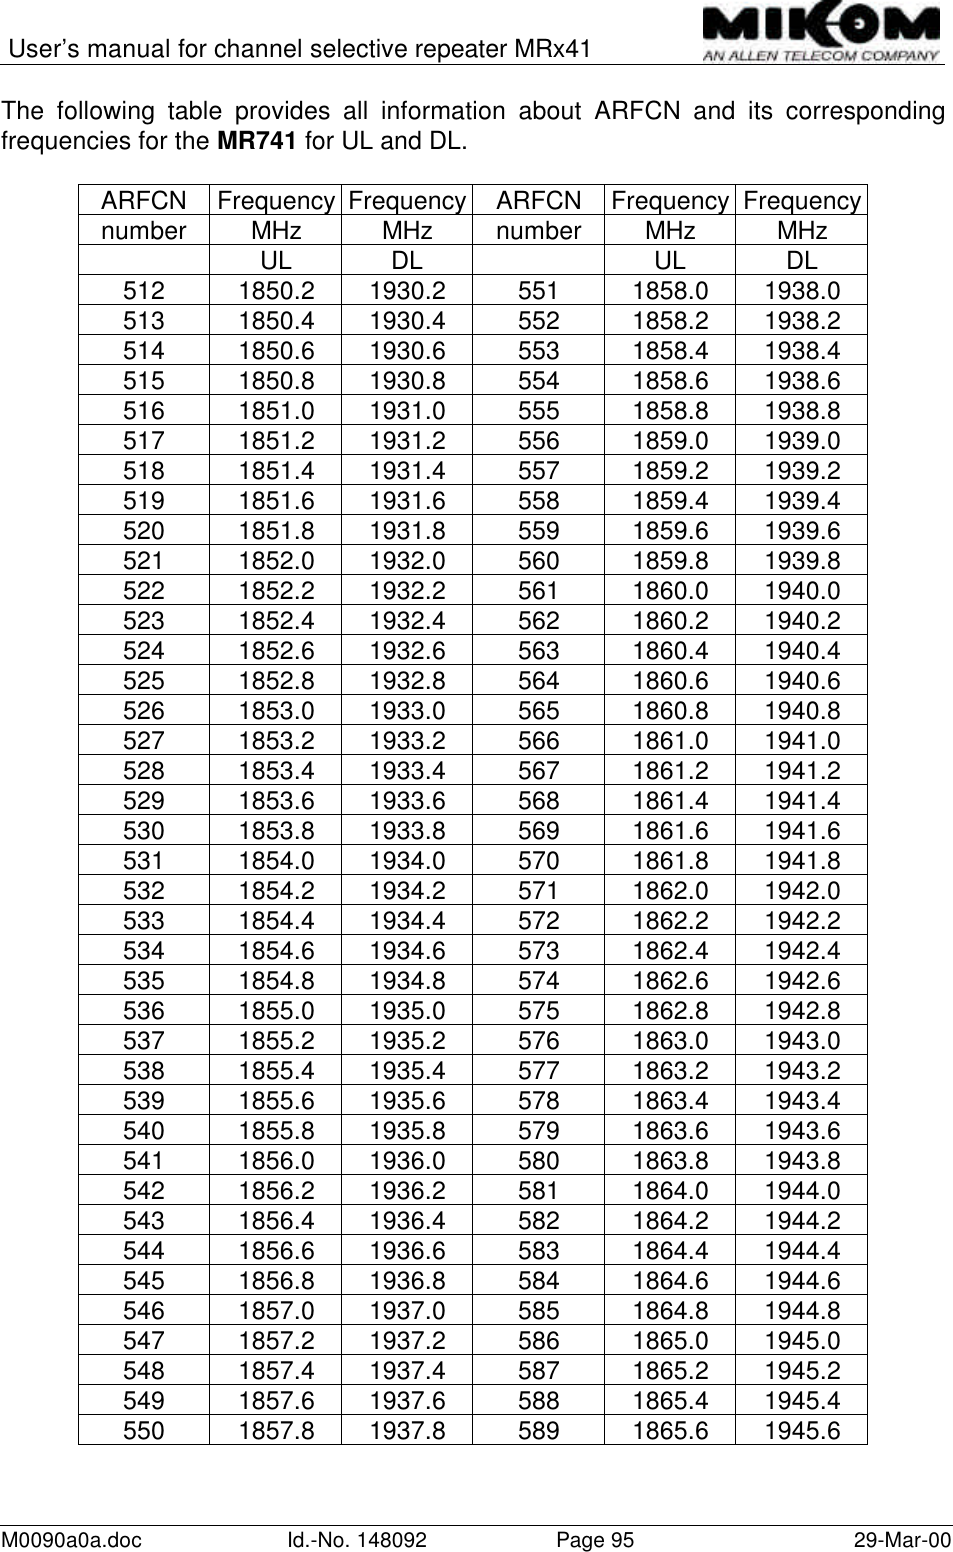 User’s manual for channel selective repeater MRx41M0090a0a.doc Id.-No. 148092 Page 95 29-Mar-00The following table provides all information about ARFCN and its correspondingfrequencies for the MR741 for UL and DL.ARFCN Frequency Frequency ARFCN Frequency Frequencynumber MHz MHz number MHz MHzUL DL UL DL512 1850.2 1930.2 551 1858.0 1938.0513 1850.4 1930.4 552 1858.2 1938.2514 1850.6 1930.6 553 1858.4 1938.4515 1850.8 1930.8 554 1858.6 1938.6516 1851.0 1931.0 555 1858.8 1938.8517 1851.2 1931.2 556 1859.0 1939.0518 1851.4 1931.4 557 1859.2 1939.2519 1851.6 1931.6 558 1859.4 1939.4520 1851.8 1931.8 559 1859.6 1939.6521 1852.0 1932.0 560 1859.8 1939.8522 1852.2 1932.2 561 1860.0 1940.0523 1852.4 1932.4 562 1860.2 1940.2524 1852.6 1932.6 563 1860.4 1940.4525 1852.8 1932.8 564 1860.6 1940.6526 1853.0 1933.0 565 1860.8 1940.8527 1853.2 1933.2 566 1861.0 1941.0528 1853.4 1933.4 567 1861.2 1941.2529 1853.6 1933.6 568 1861.4 1941.4530 1853.8 1933.8 569 1861.6 1941.6531 1854.0 1934.0 570 1861.8 1941.8532 1854.2 1934.2 571 1862.0 1942.0533 1854.4 1934.4 572 1862.2 1942.2534 1854.6 1934.6 573 1862.4 1942.4535 1854.8 1934.8 574 1862.6 1942.6536 1855.0 1935.0 575 1862.8 1942.8537 1855.2 1935.2 576 1863.0 1943.0538 1855.4 1935.4 577 1863.2 1943.2539 1855.6 1935.6 578 1863.4 1943.4540 1855.8 1935.8 579 1863.6 1943.6541 1856.0 1936.0 580 1863.8 1943.8542 1856.2 1936.2 581 1864.0 1944.0543 1856.4 1936.4 582 1864.2 1944.2544 1856.6 1936.6 583 1864.4 1944.4545 1856.8 1936.8 584 1864.6 1944.6546 1857.0 1937.0 585 1864.8 1944.8547 1857.2 1937.2 586 1865.0 1945.0548 1857.4 1937.4 587 1865.2 1945.2549 1857.6 1937.6 588 1865.4 1945.4550 1857.8 1937.8 589 1865.6 1945.6